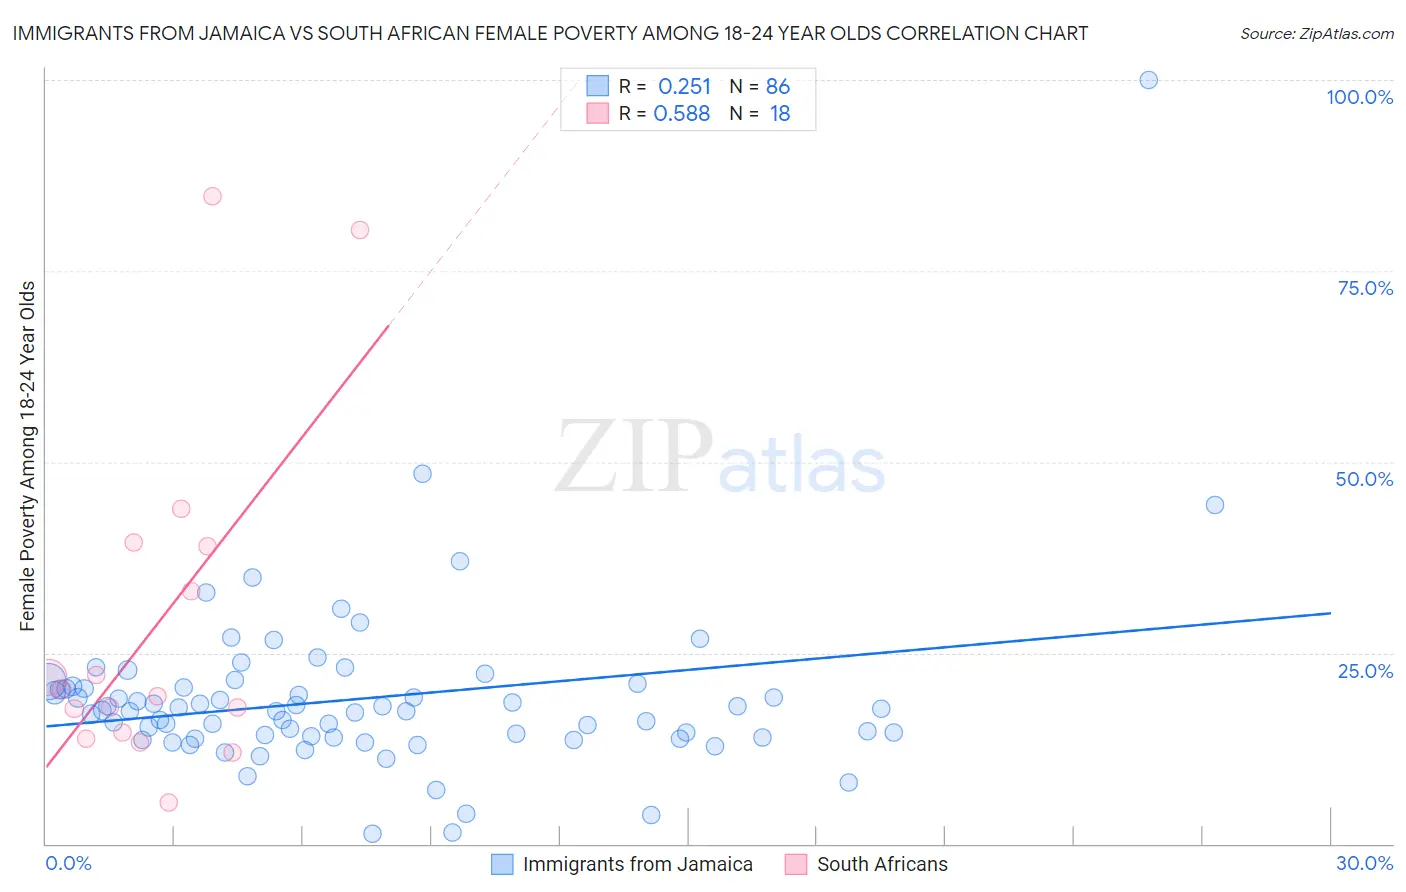 Immigrants from Jamaica vs South African Female Poverty Among 18-24 Year Olds